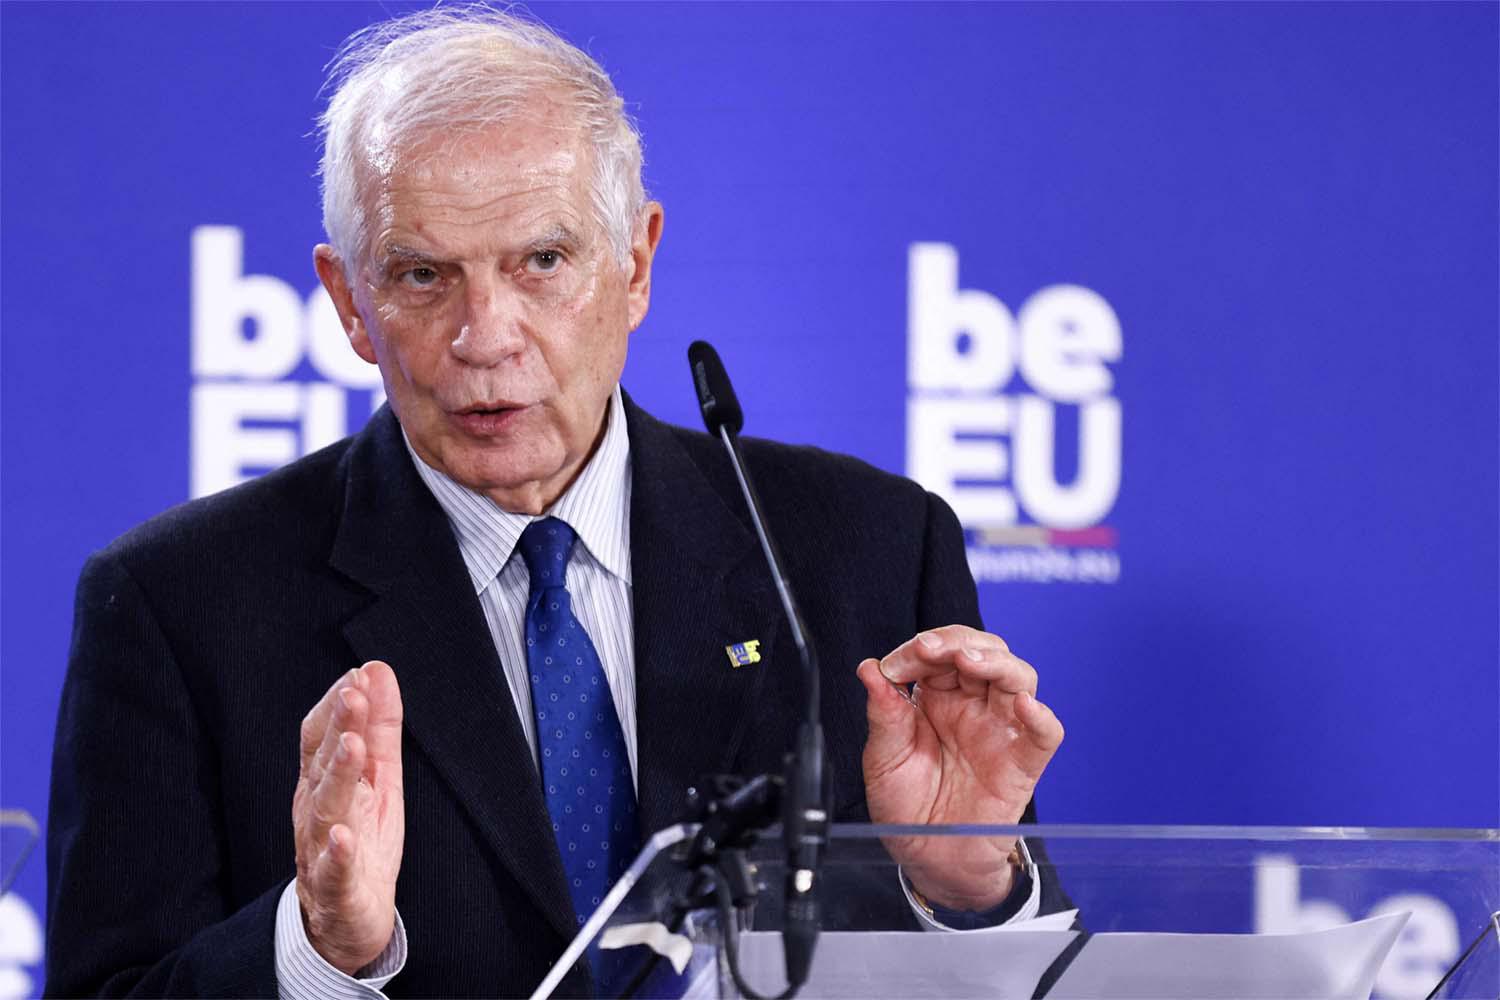 Borrell has become more vocal about Israel's deadly war on Gaza